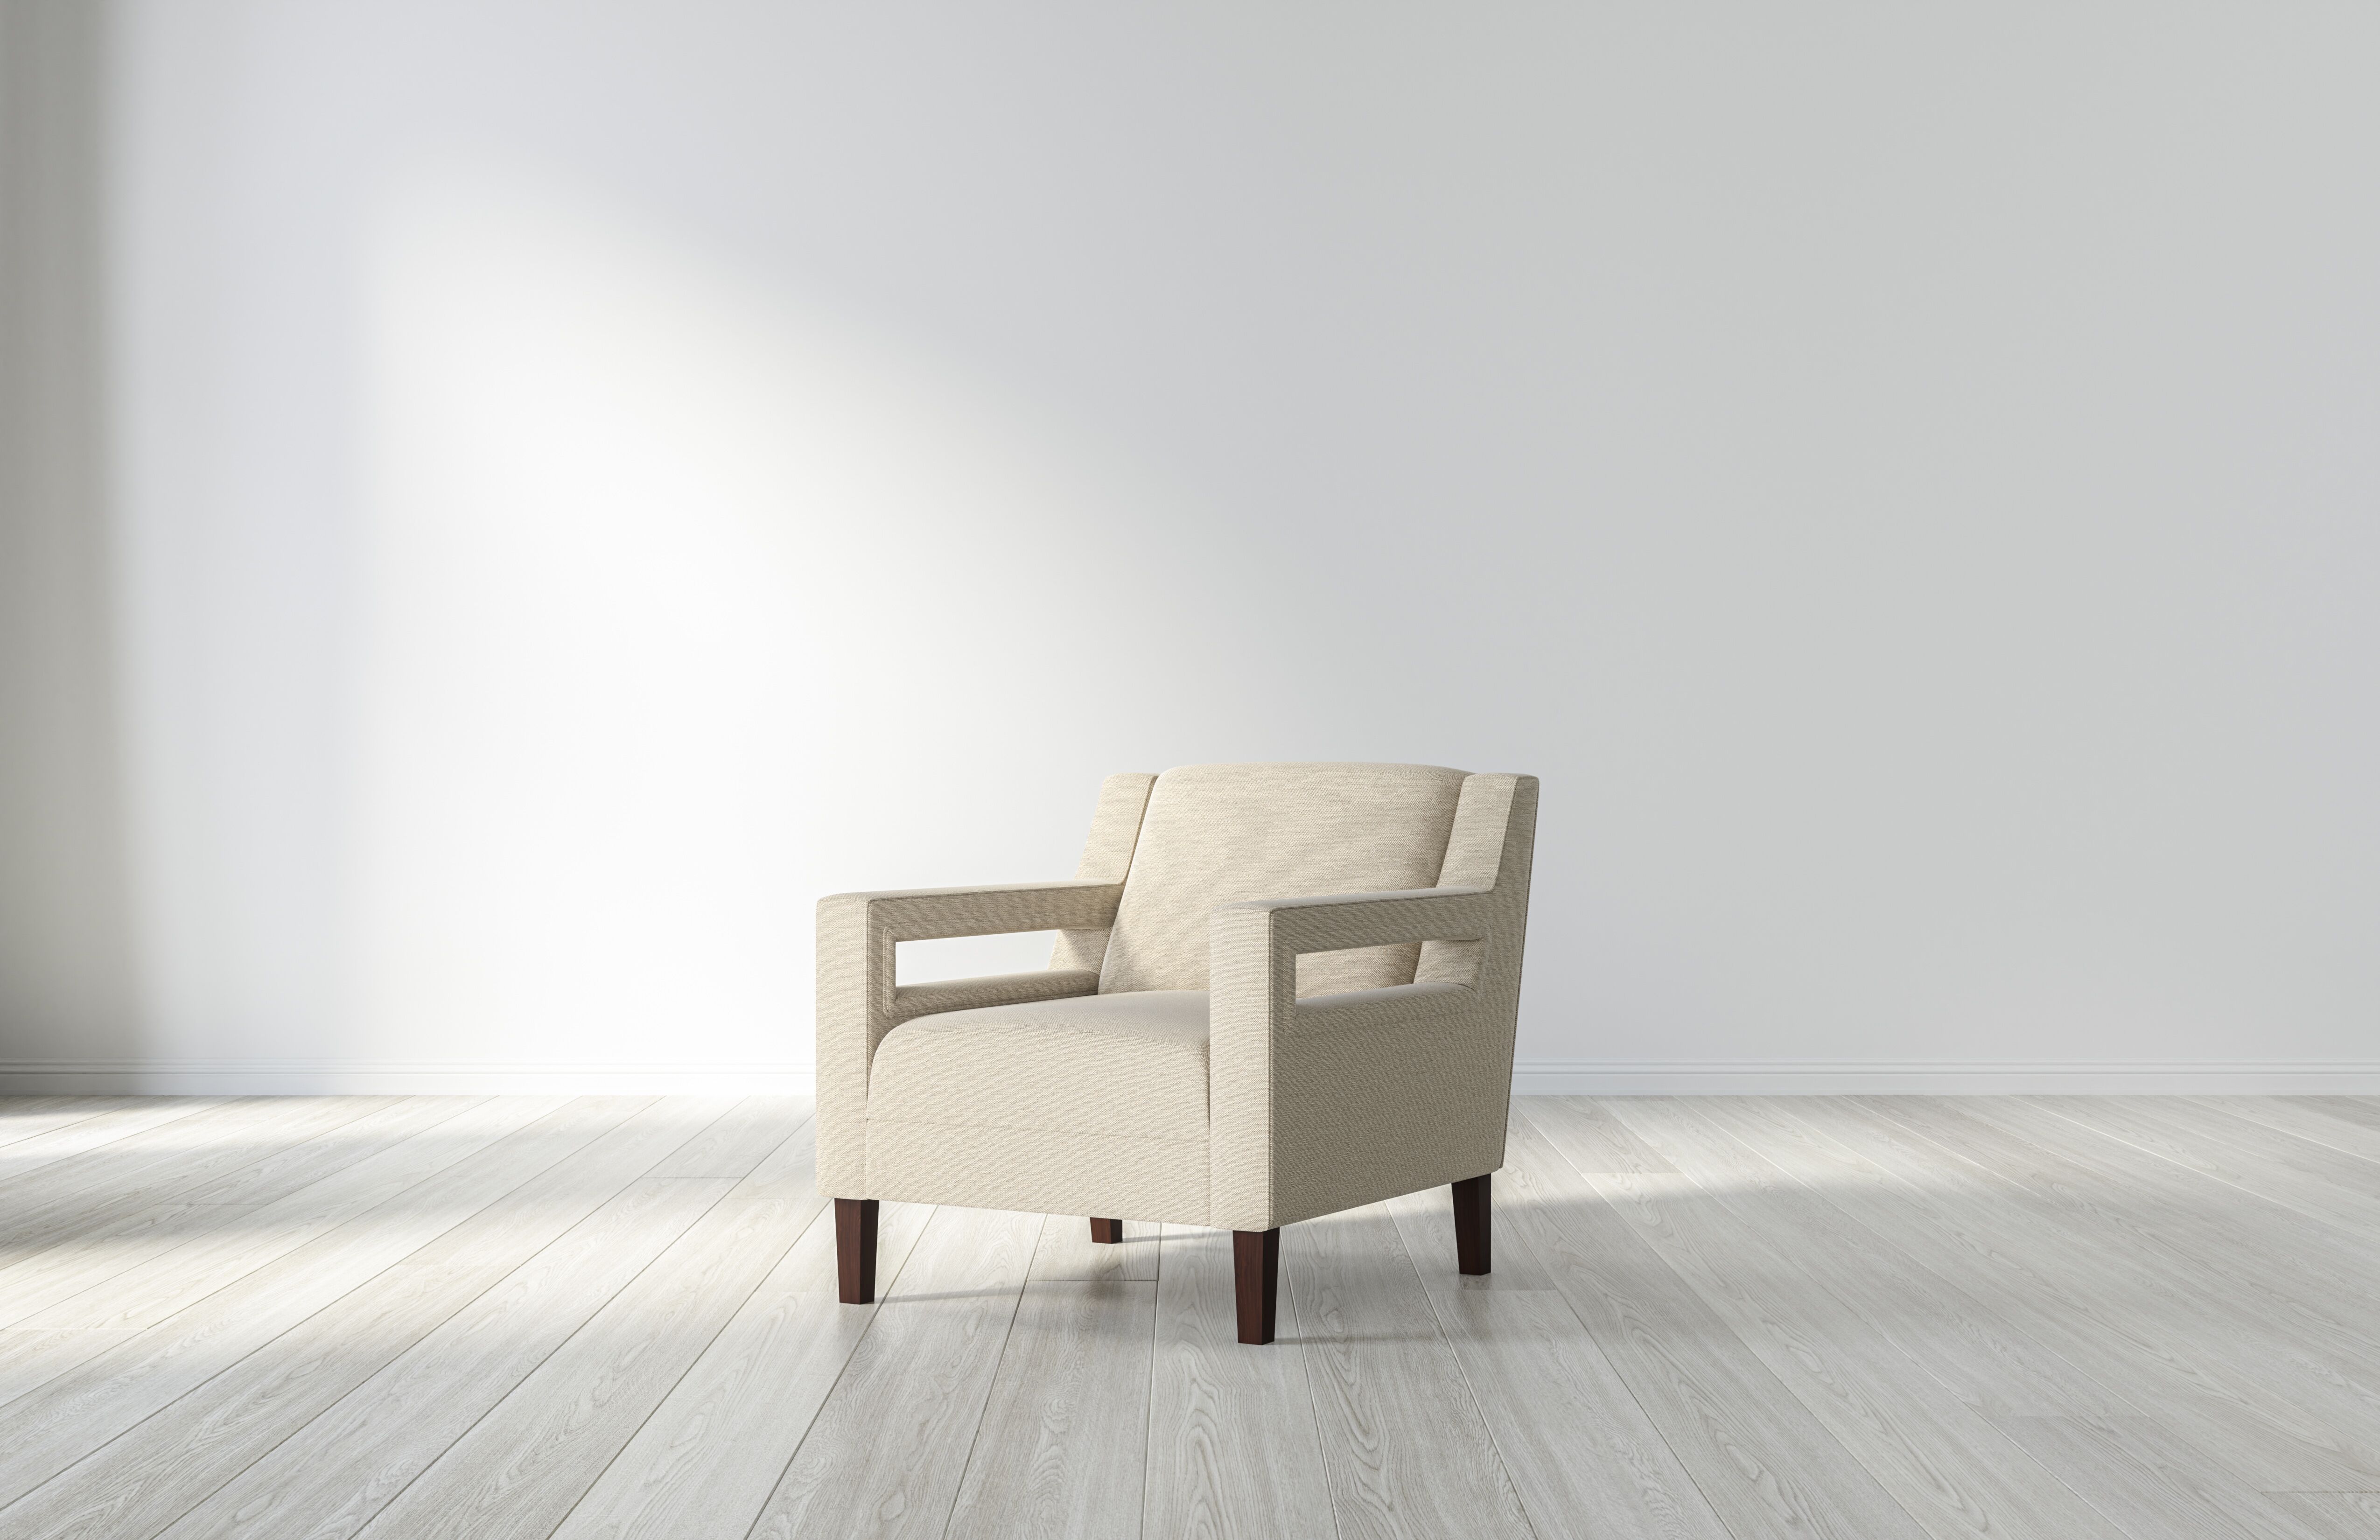 The Saatva Logan Armchair in Natural Linen - a mid-century style chair that exhudes modern elegance.